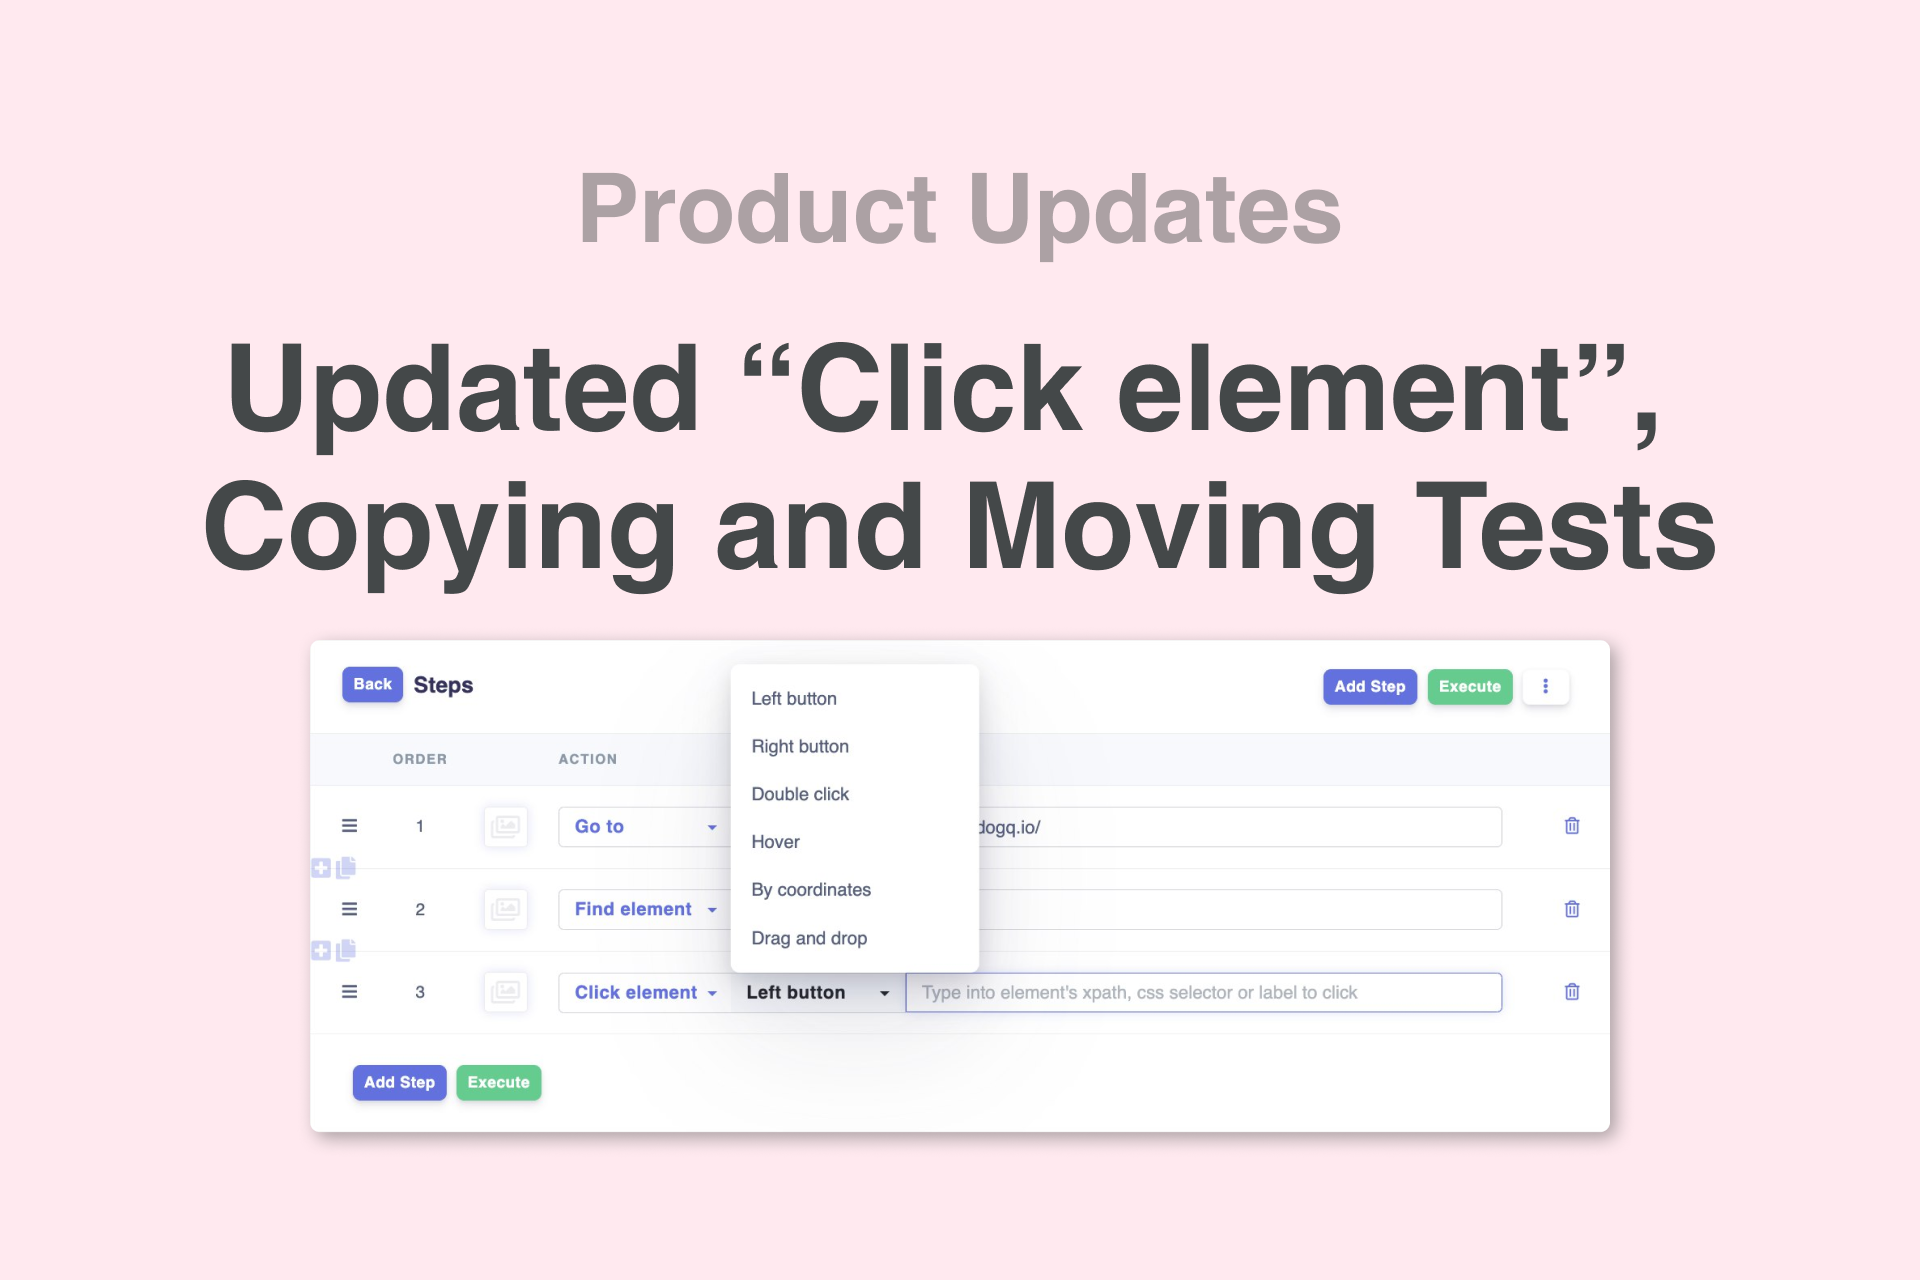 Product Updates: Updated “Click element” step, new ways to organize tests, QA services